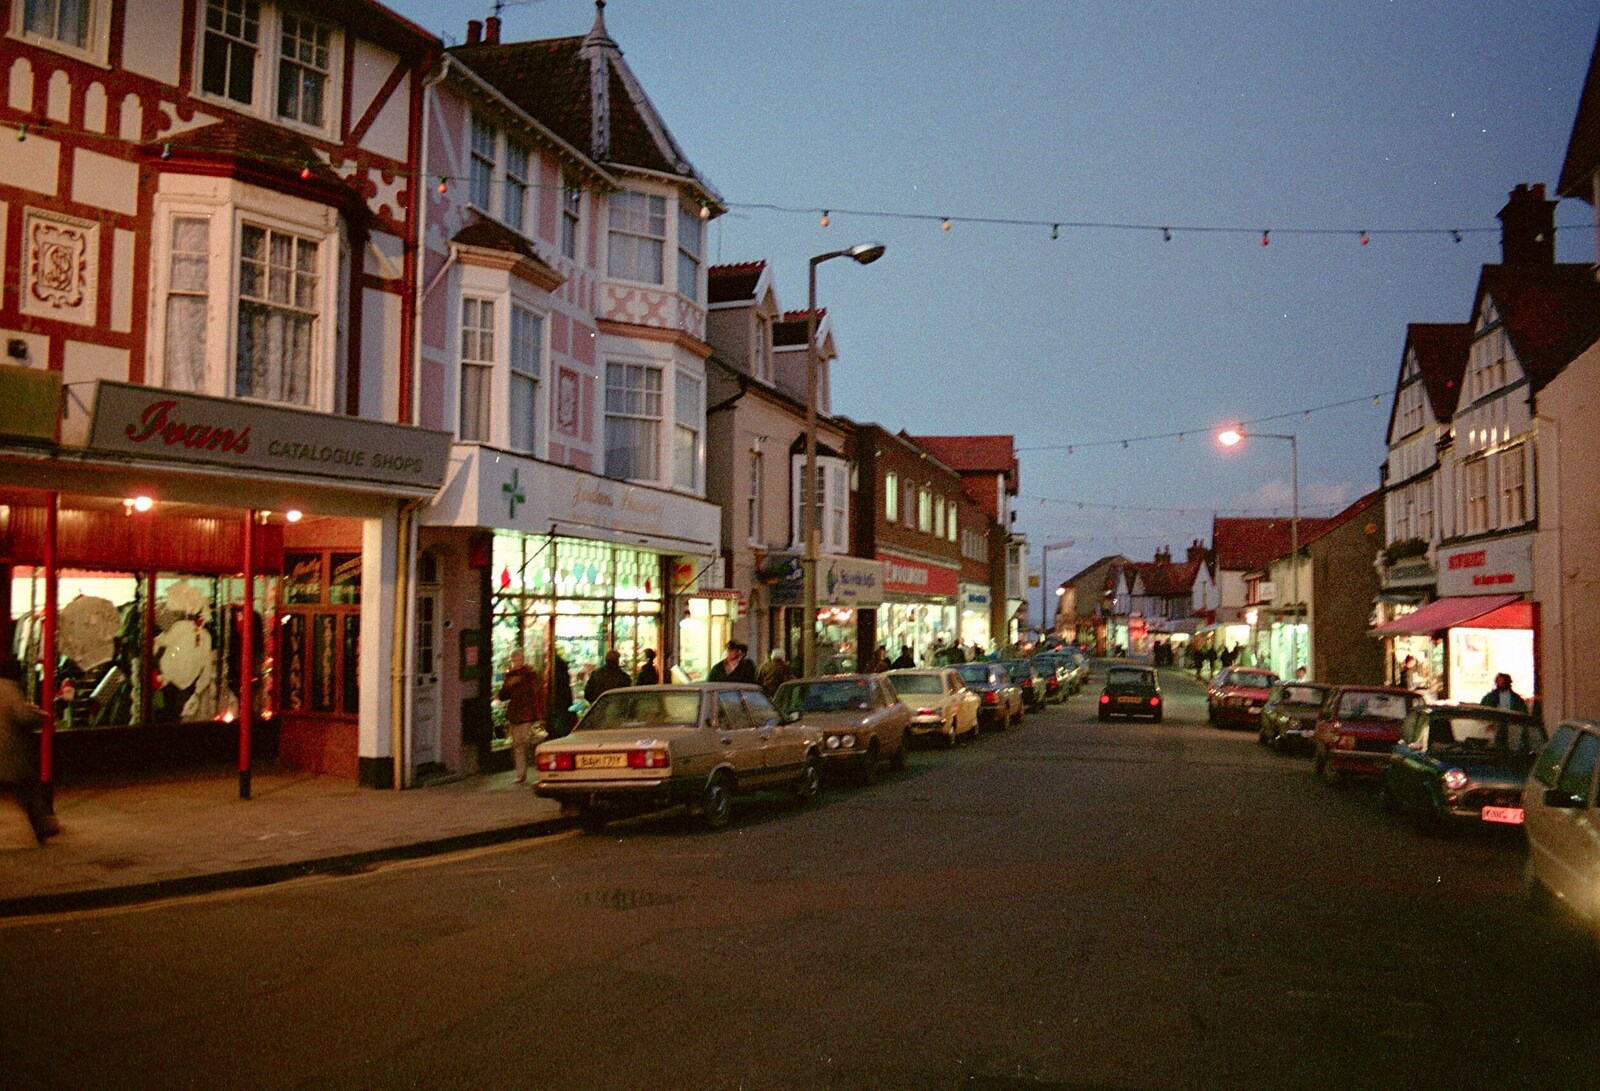 A Visit to Sheringham, North Norfolk - 20th November 1987: Sheringham High Street in the evening